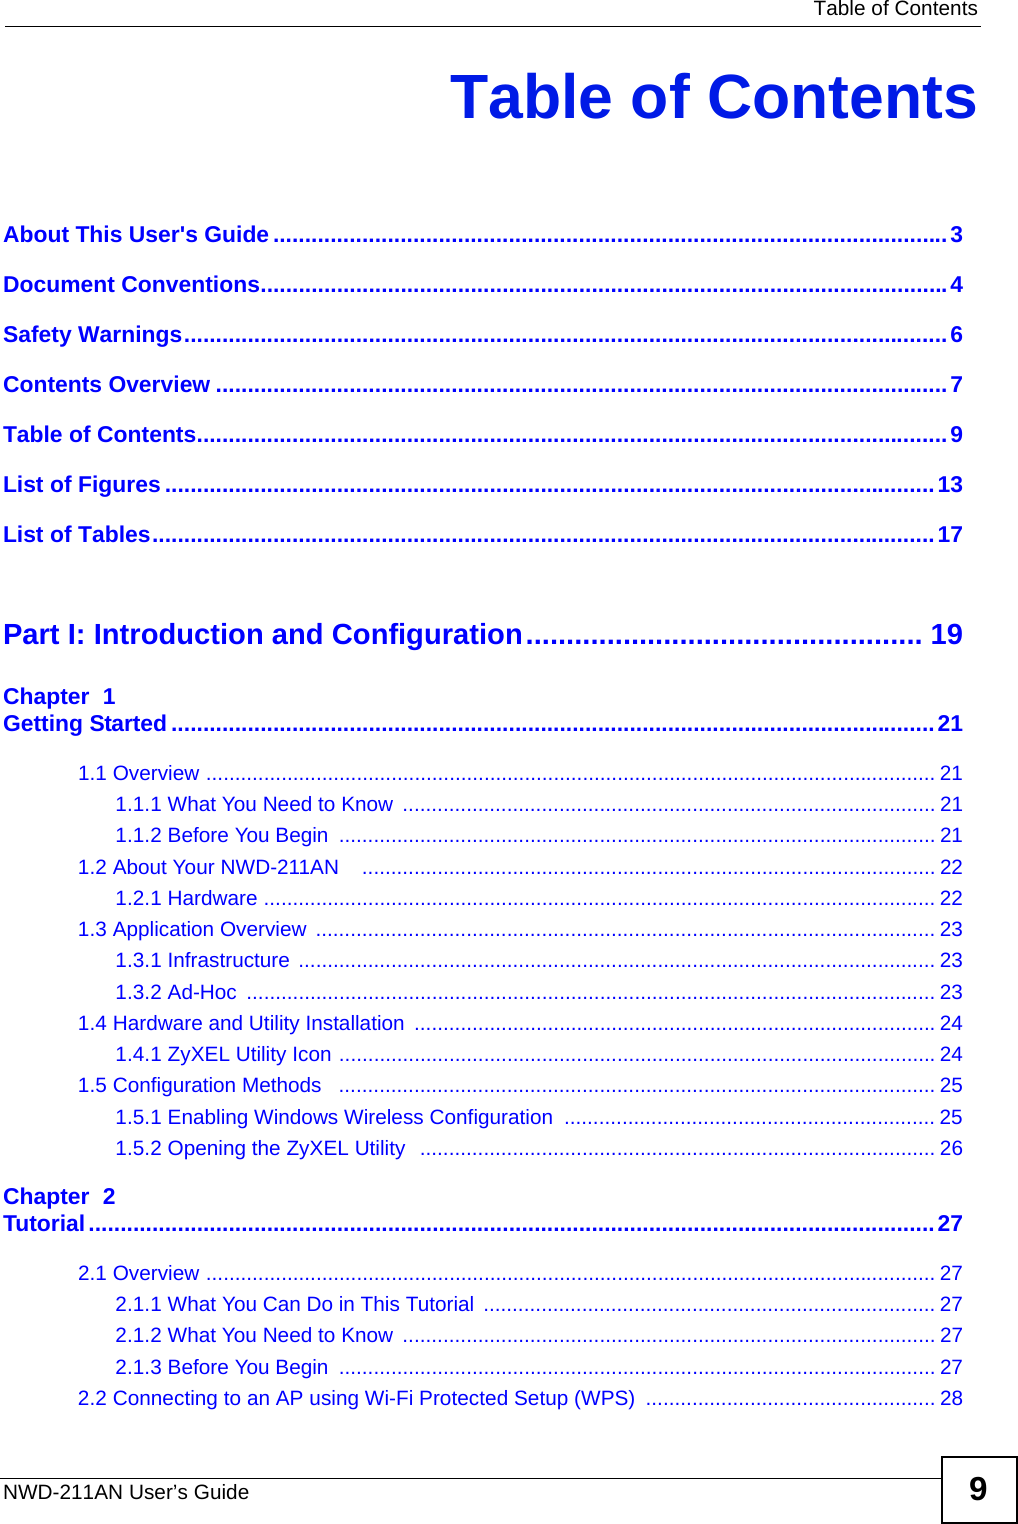   Table of ContentsNWD-211AN User’s Guide 9Table of ContentsAbout This User&apos;s Guide..........................................................................................................3Document Conventions............................................................................................................4Safety Warnings........................................................................................................................6Contents Overview ...................................................................................................................7Table of Contents......................................................................................................................9List of Figures .........................................................................................................................13List of Tables...........................................................................................................................17Part I: Introduction and Configuration................................................. 19Chapter  1Getting Started ........................................................................................................................211.1 Overview .............................................................................................................................. 211.1.1 What You Need to Know  ............................................................................................ 211.1.2 Before You Begin  ....................................................................................................... 211.2 About Your NWD-211AN    ................................................................................................... 221.2.1 Hardware .................................................................................................................... 221.3 Application Overview  ........................................................................................................... 231.3.1 Infrastructure .............................................................................................................. 231.3.2 Ad-Hoc  ....................................................................................................................... 231.4 Hardware and Utility Installation  ..........................................................................................241.4.1 ZyXEL Utility Icon .......................................................................................................241.5 Configuration Methods   ....................................................................................................... 251.5.1 Enabling Windows Wireless Configuration  ................................................................ 251.5.2 Opening the ZyXEL Utility  ......................................................................................... 26Chapter  2Tutorial.....................................................................................................................................272.1 Overview .............................................................................................................................. 272.1.1 What You Can Do in This Tutorial .............................................................................. 272.1.2 What You Need to Know  ............................................................................................ 272.1.3 Before You Begin  ....................................................................................................... 272.2 Connecting to an AP using Wi-Fi Protected Setup (WPS)  .................................................. 28